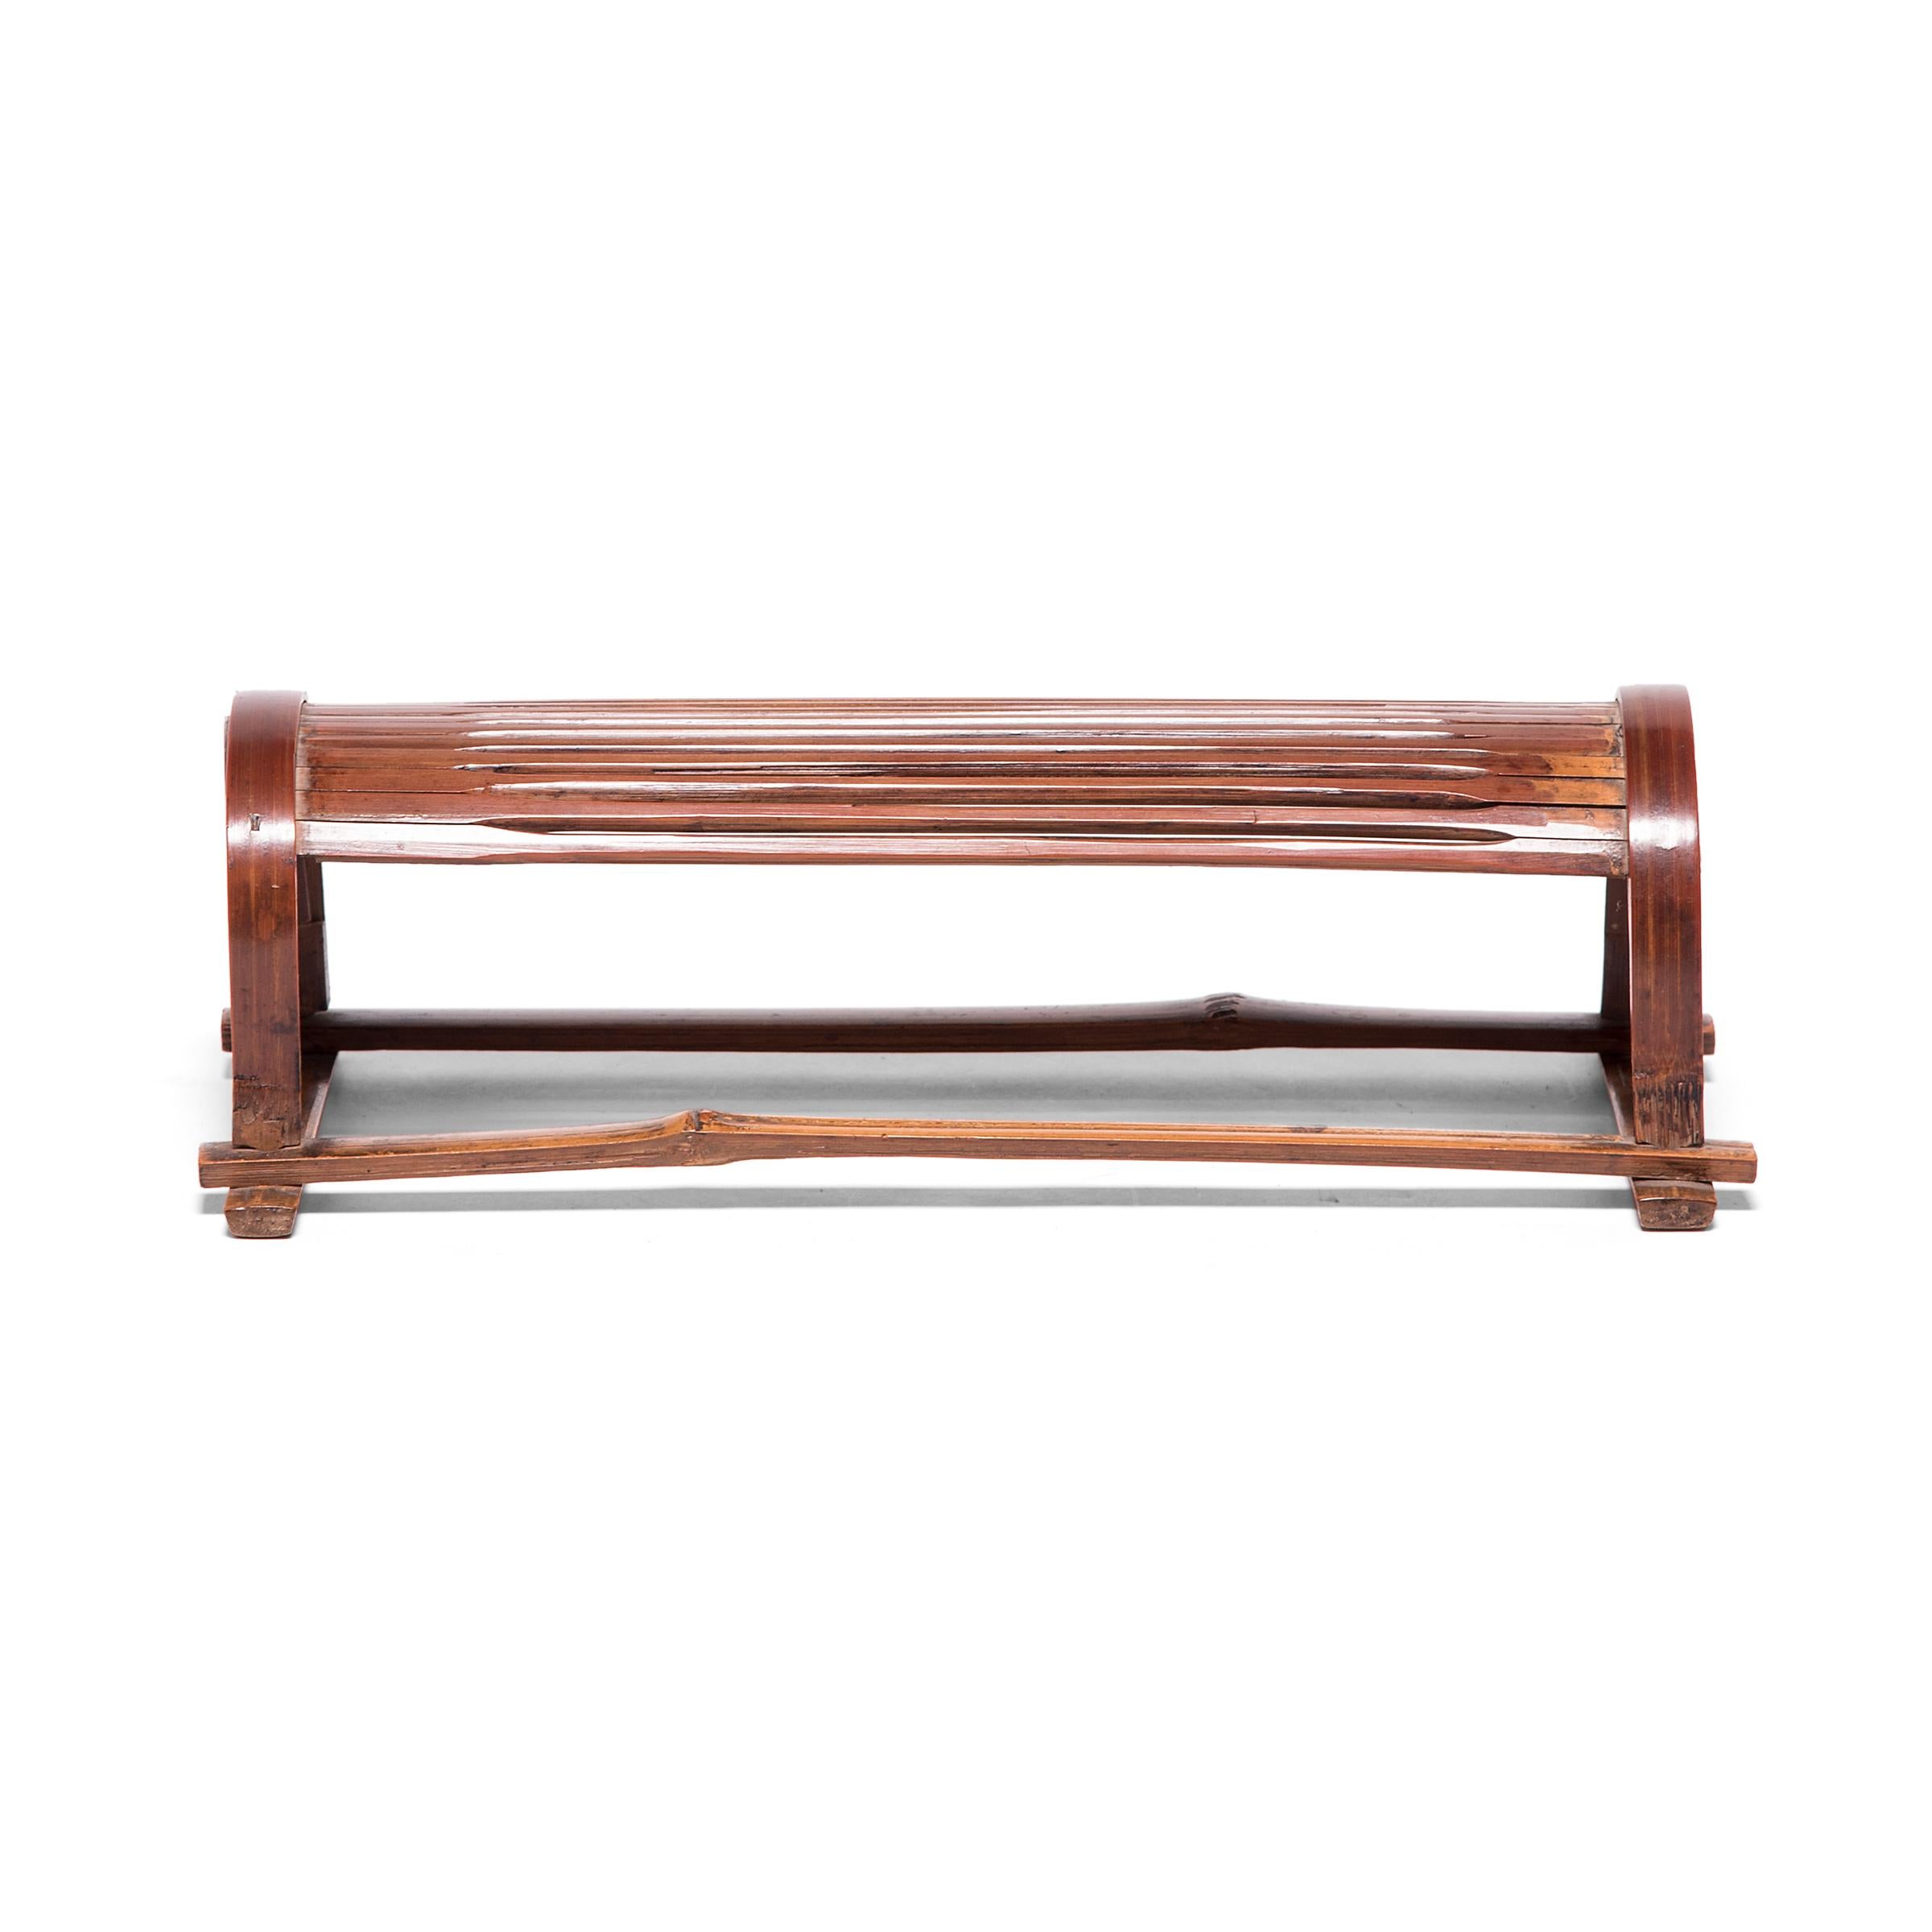 Crafted from lengths of split bamboo, this headrest enabled contour comfort, quite luxurious for 19th century, China. Lightweight and low-profile, it was the perfect accessory for a high class young woman to travel in comfort. It is an unexpected